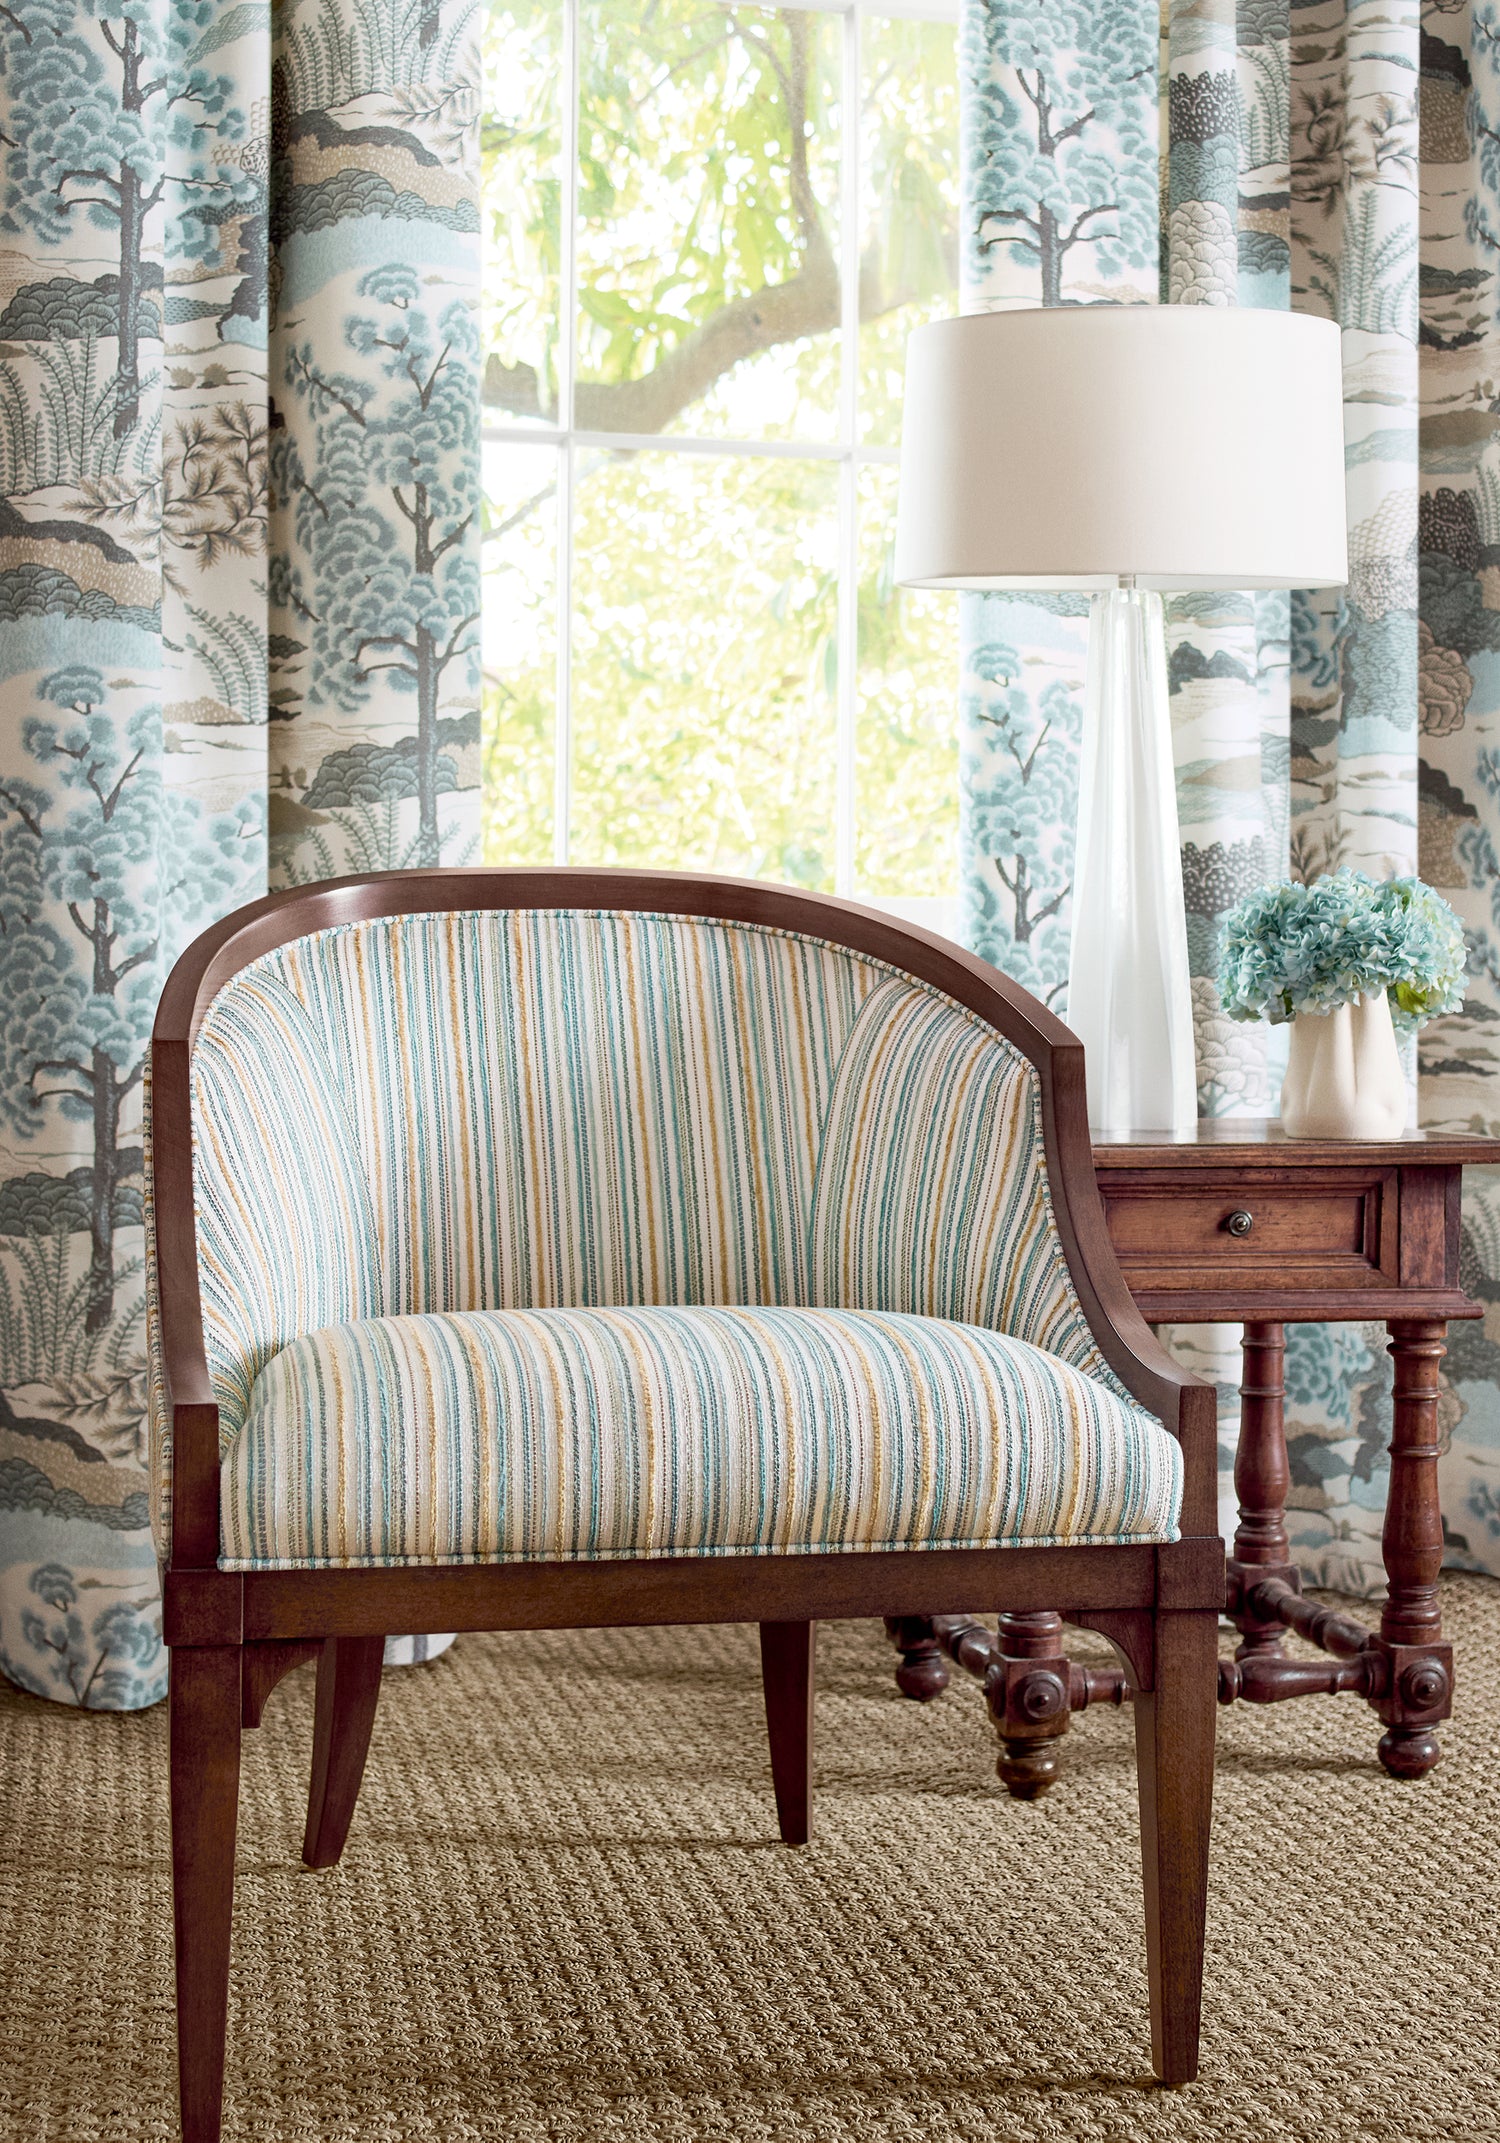 Westcott Chair in Ernie Stripe woven fabric in mineral color - pattern number W81943 by Anna French in the Bristol collection